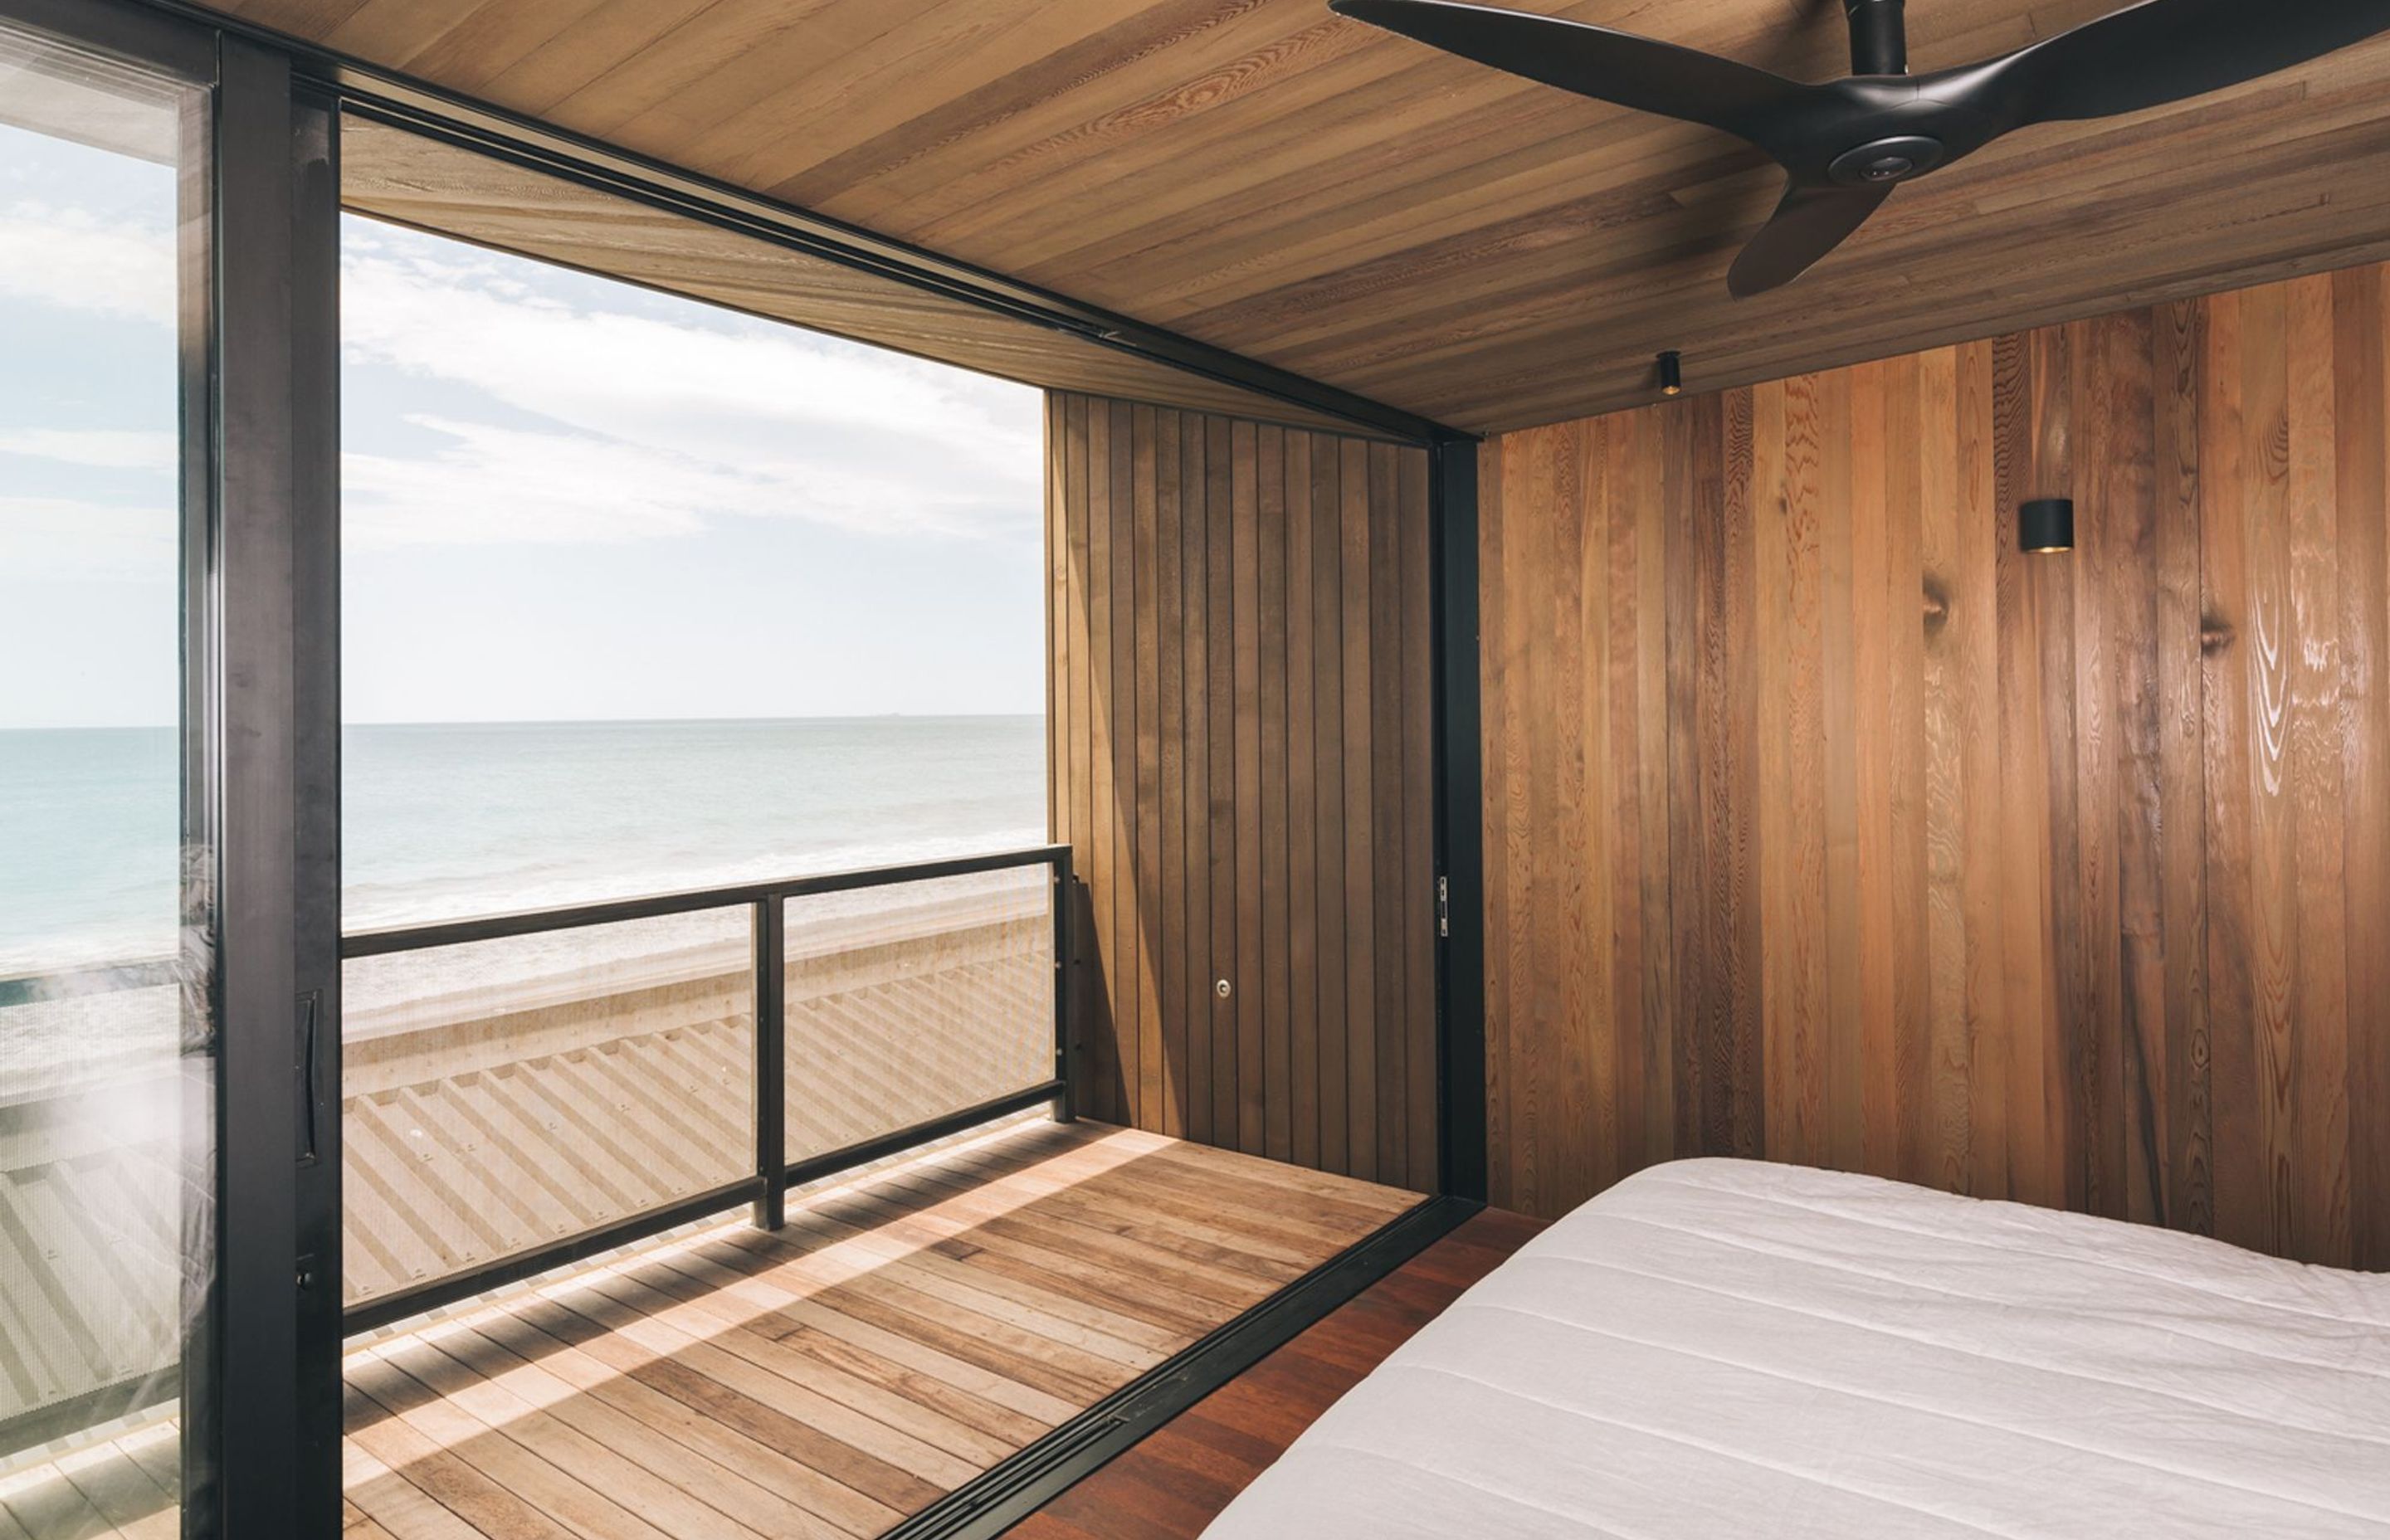 All rooms are designed to frame views of the ocean.